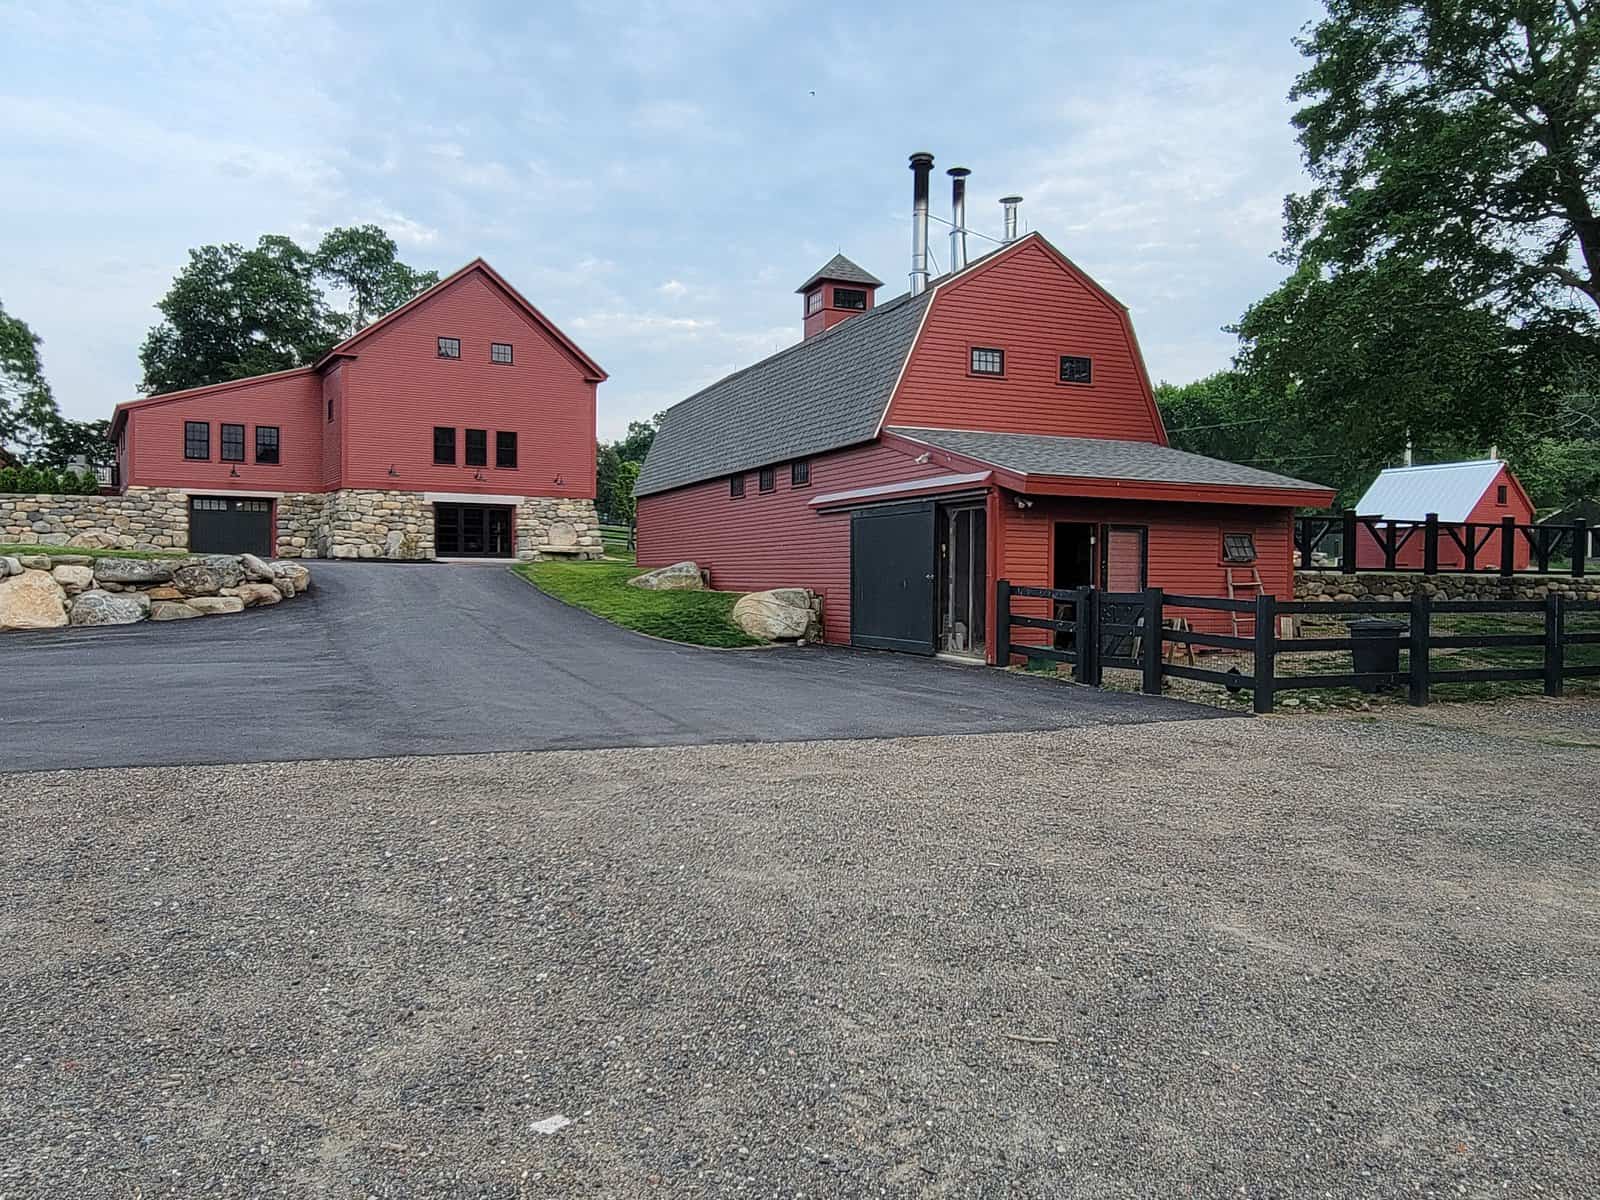 The bull barn was located in front of the 1793 barn. The bull stalls were removed and the building was converted to a maple sugaring facility. A traditional color palette was used to paint the buildings and fences to maintain the historical ambiance of the property.